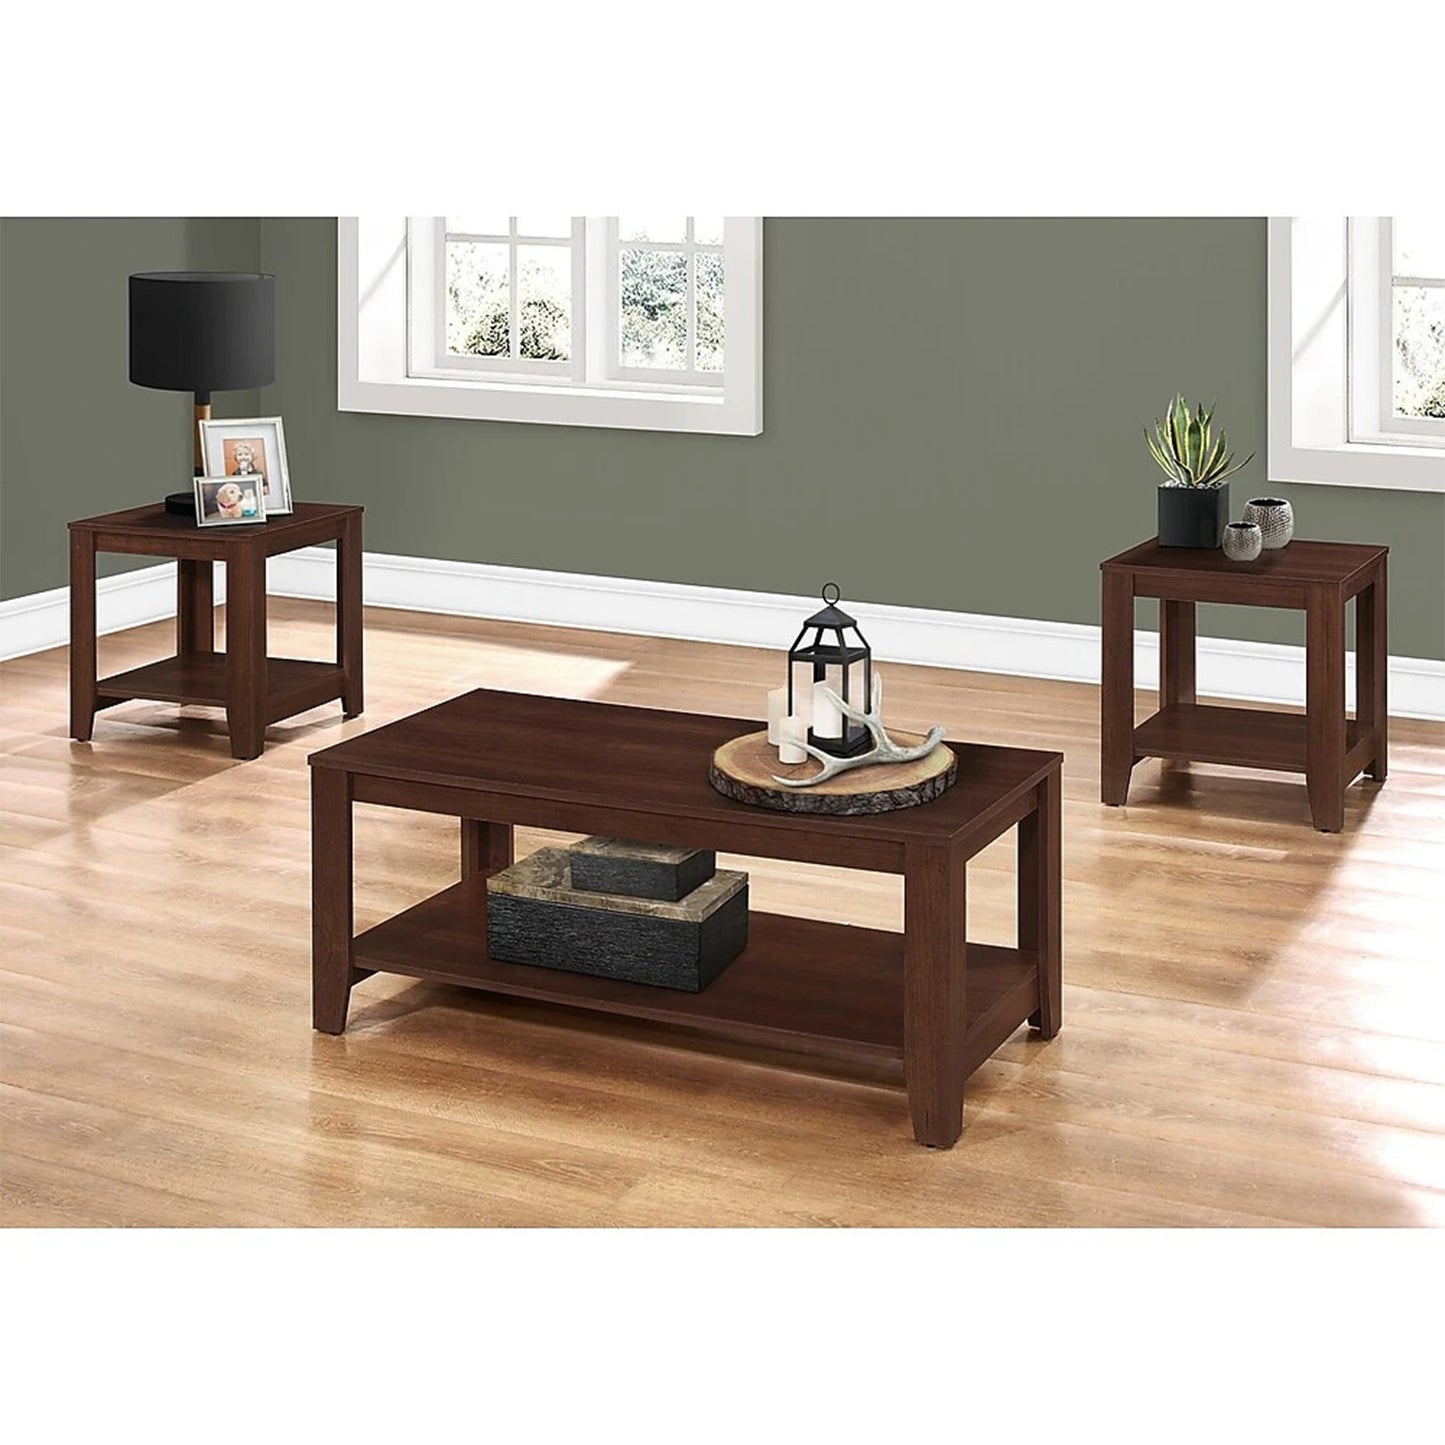 Set of Three 42" Brown Coffee Table